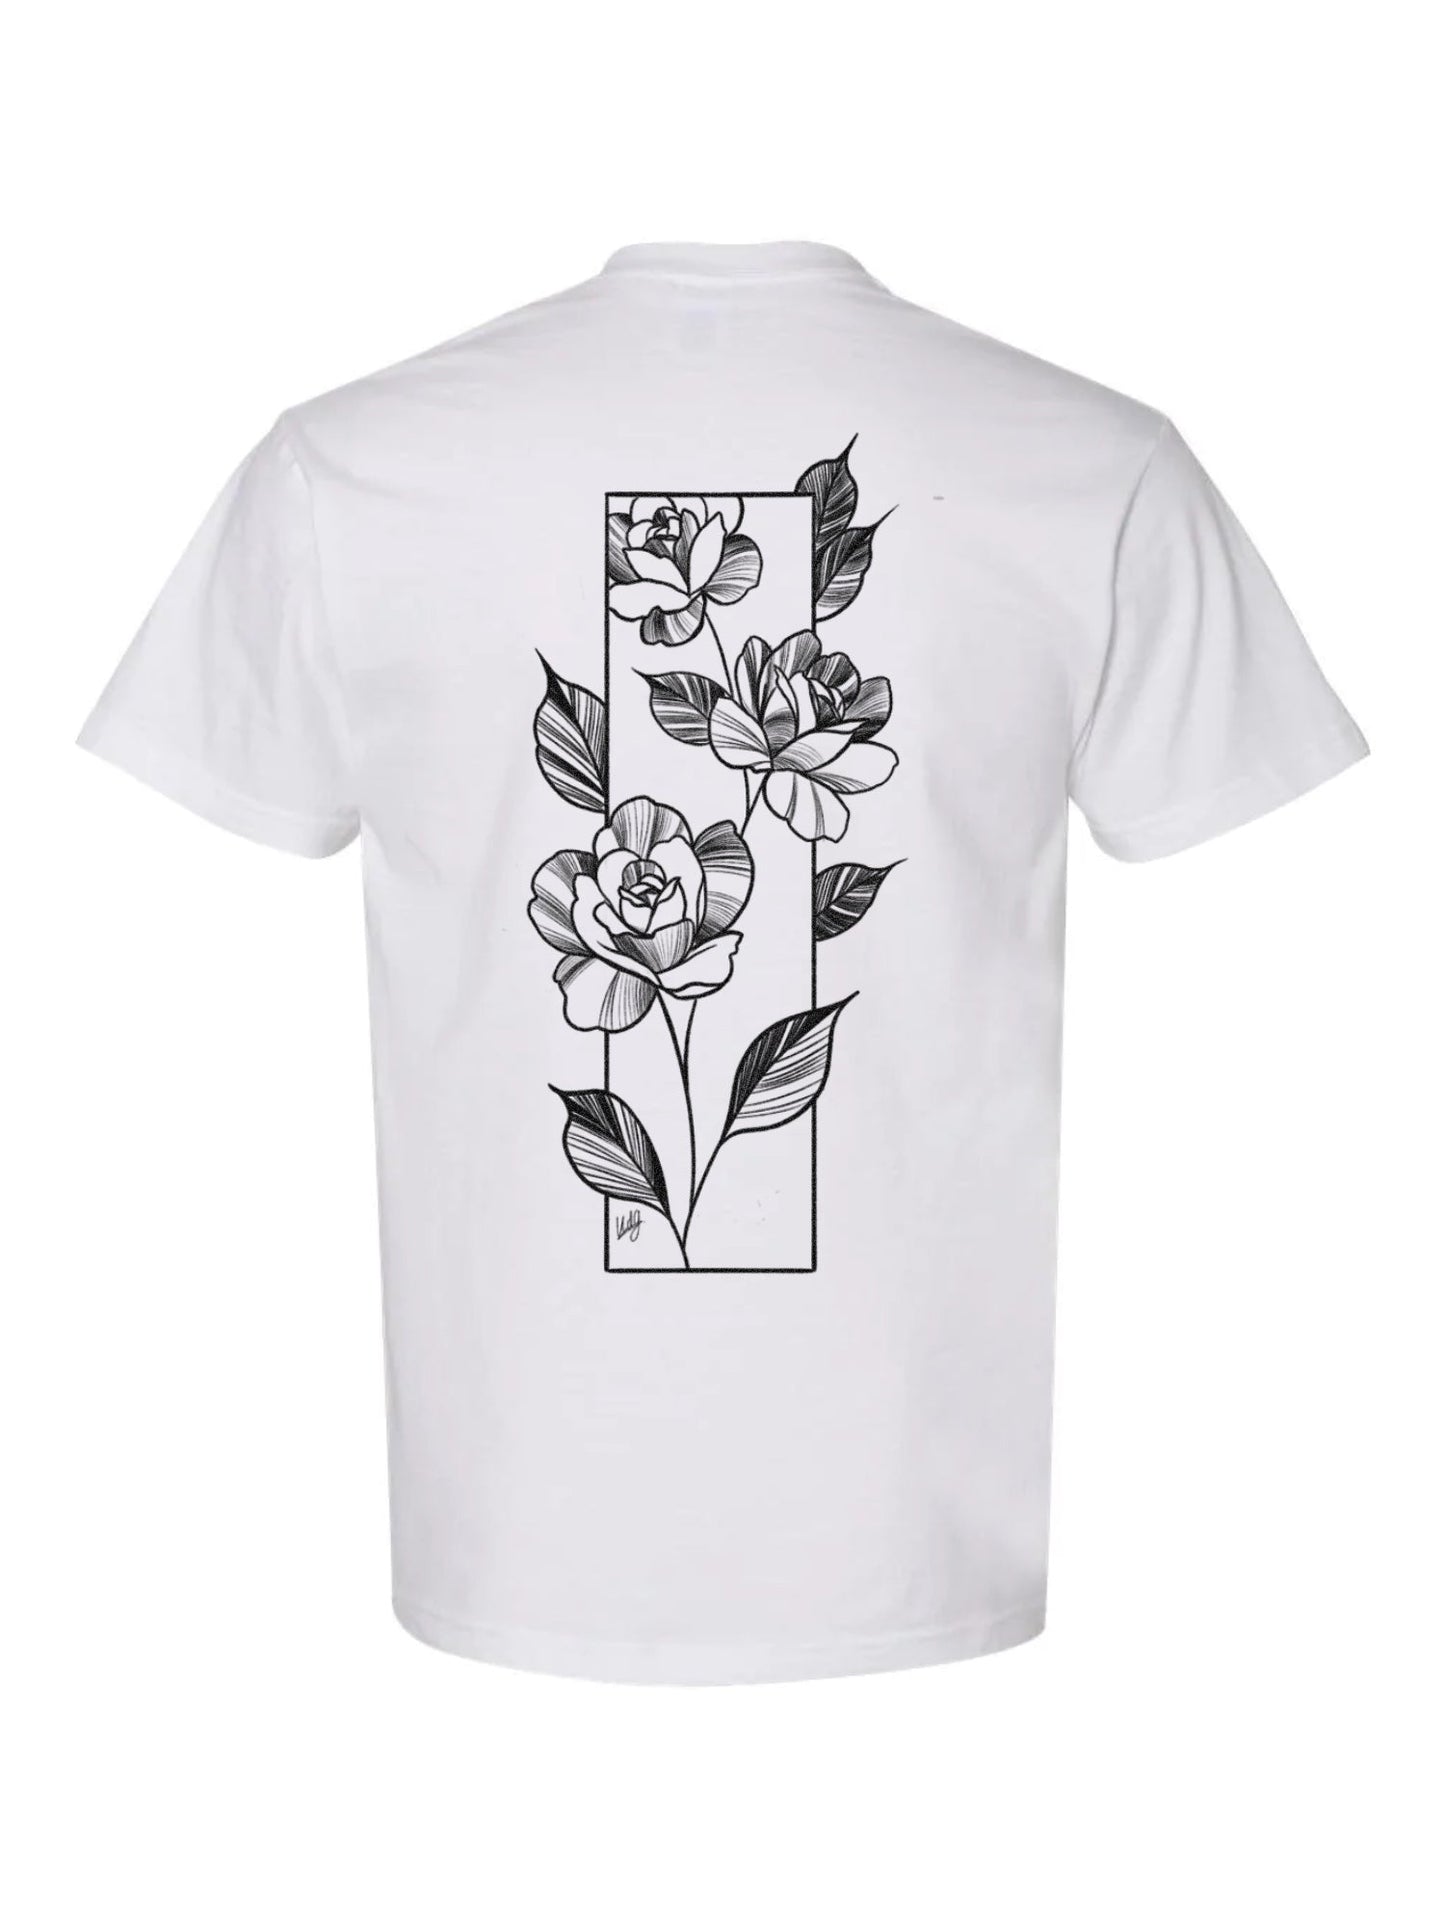 Tattoo inspired Roses art framed by a geometric rectangle on a white t-shirt